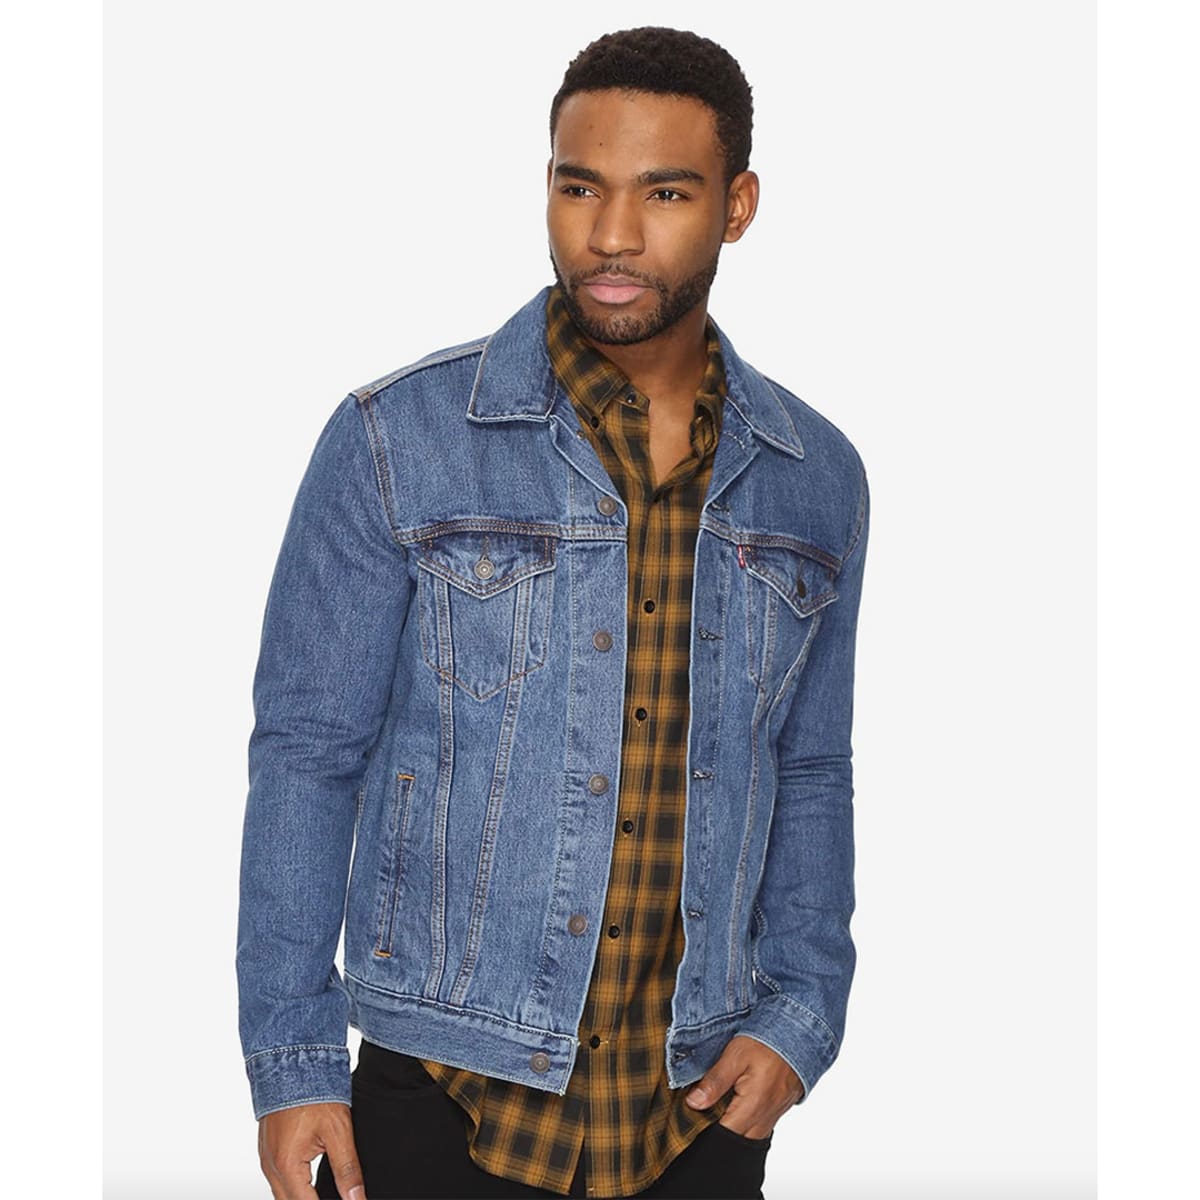 Cover up These Spring Nights in This Lightweight Levi's Trucker Jacket -  Men's Journal